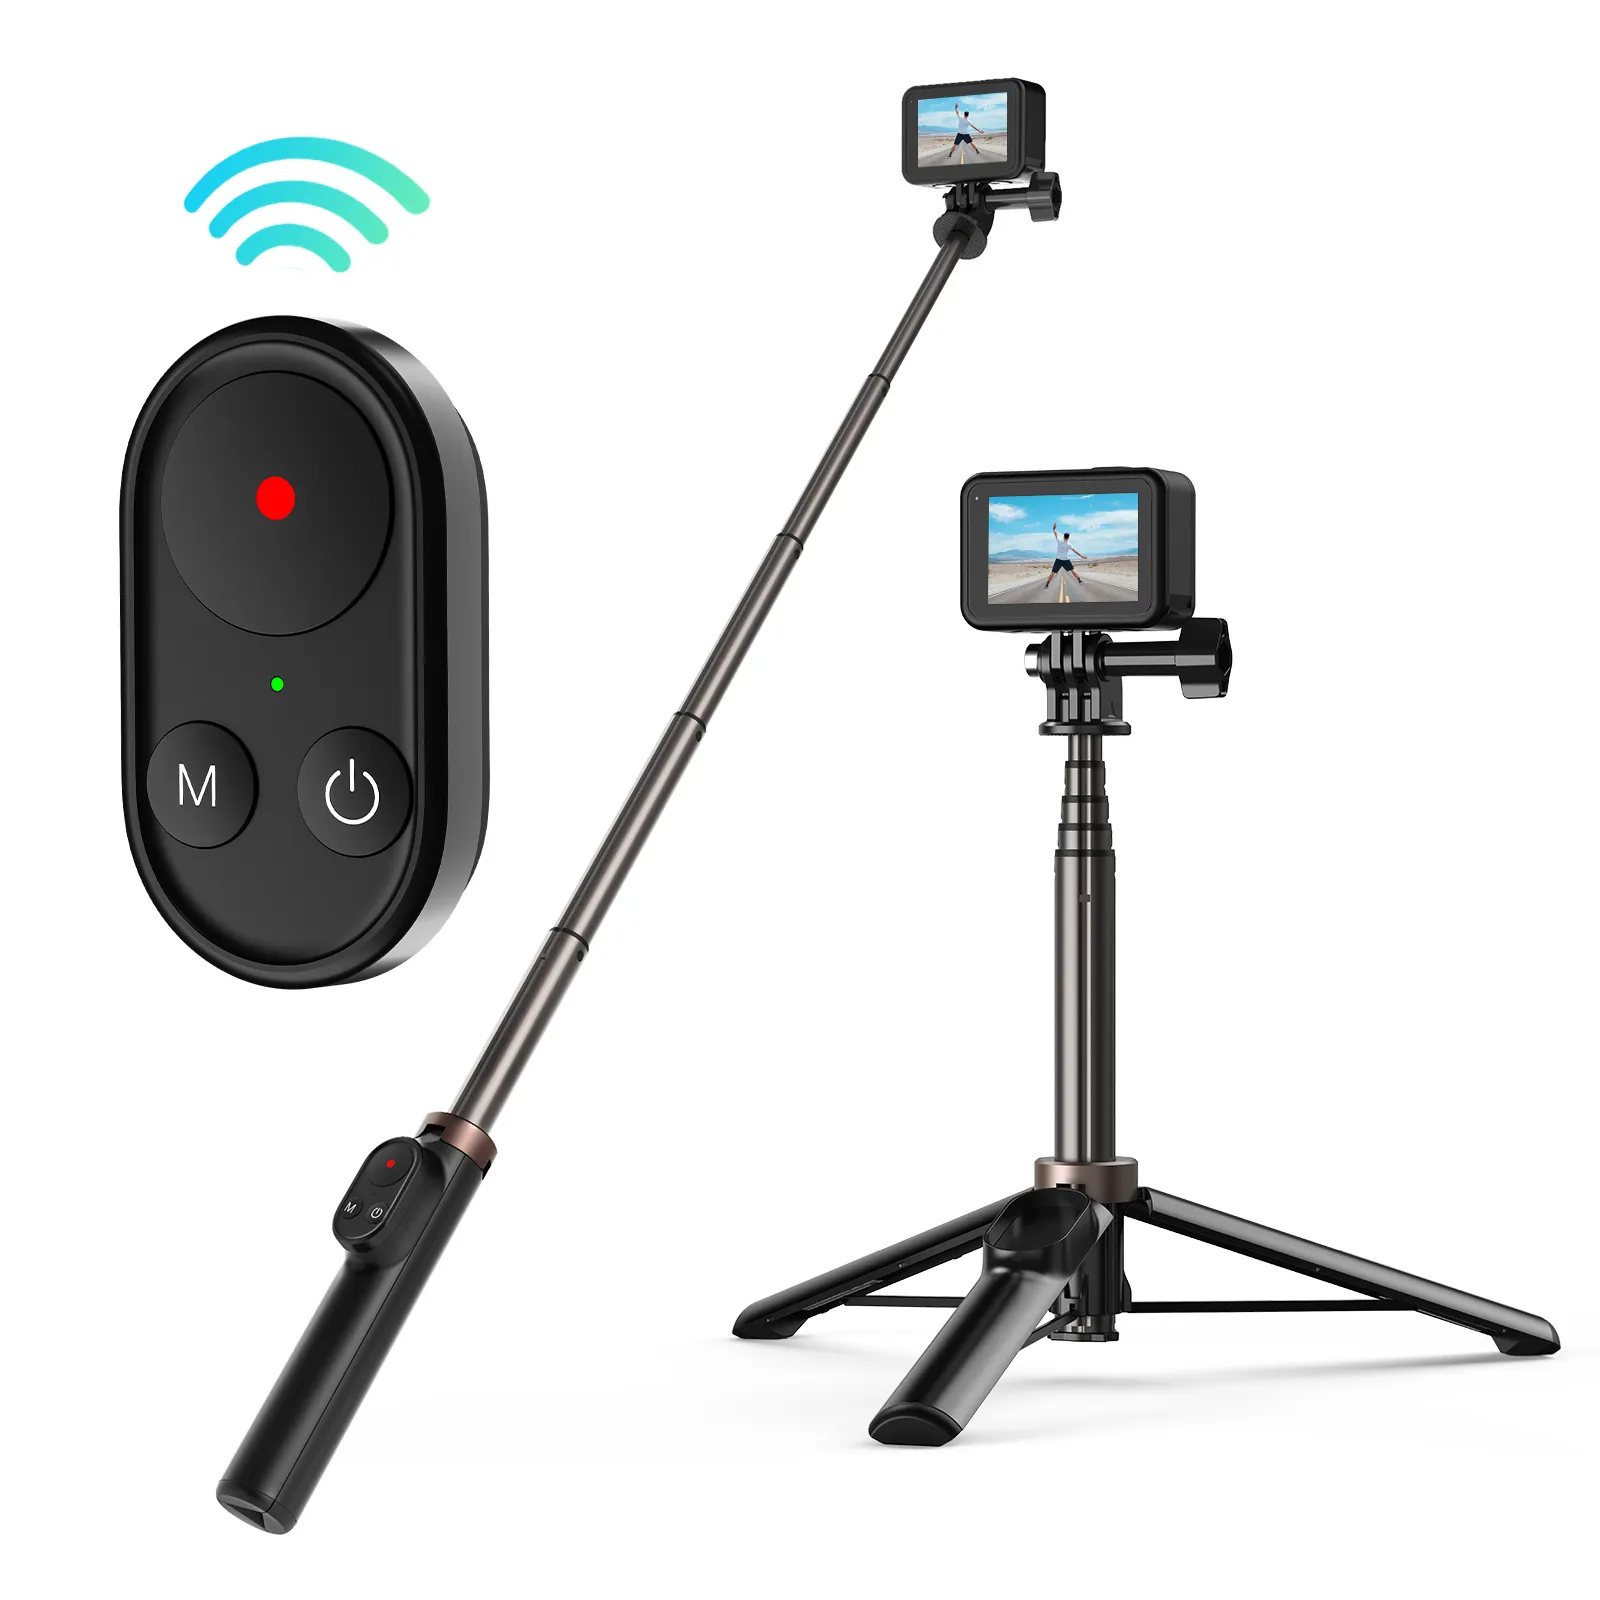 Telesin GoPros Hero10 vlog remote control flexible tripod stand selfie stick Pole for GoPros Hero10 9 8 and mobile phones